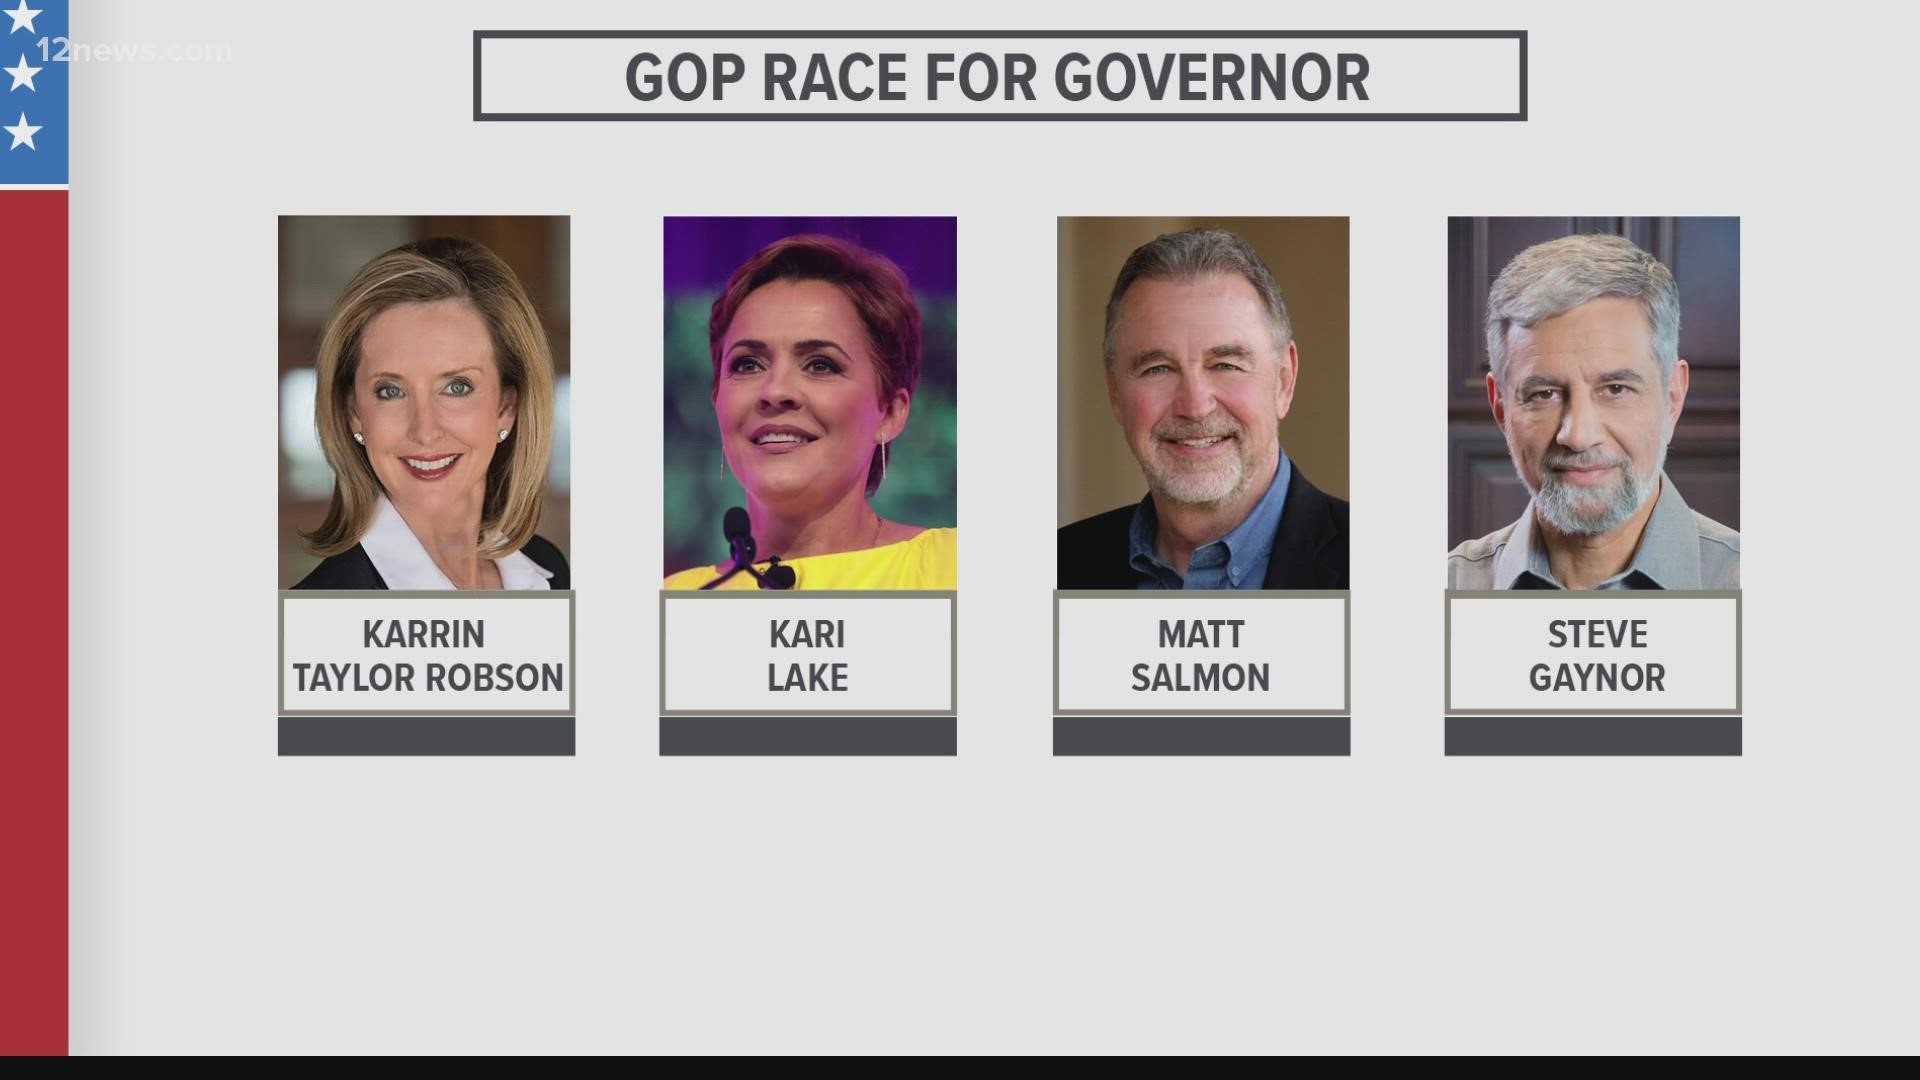 Everything about the 2022 mid-term election is earlier. But the need to get voters' attention in a crowded field has candidates for governor spending money earlier.